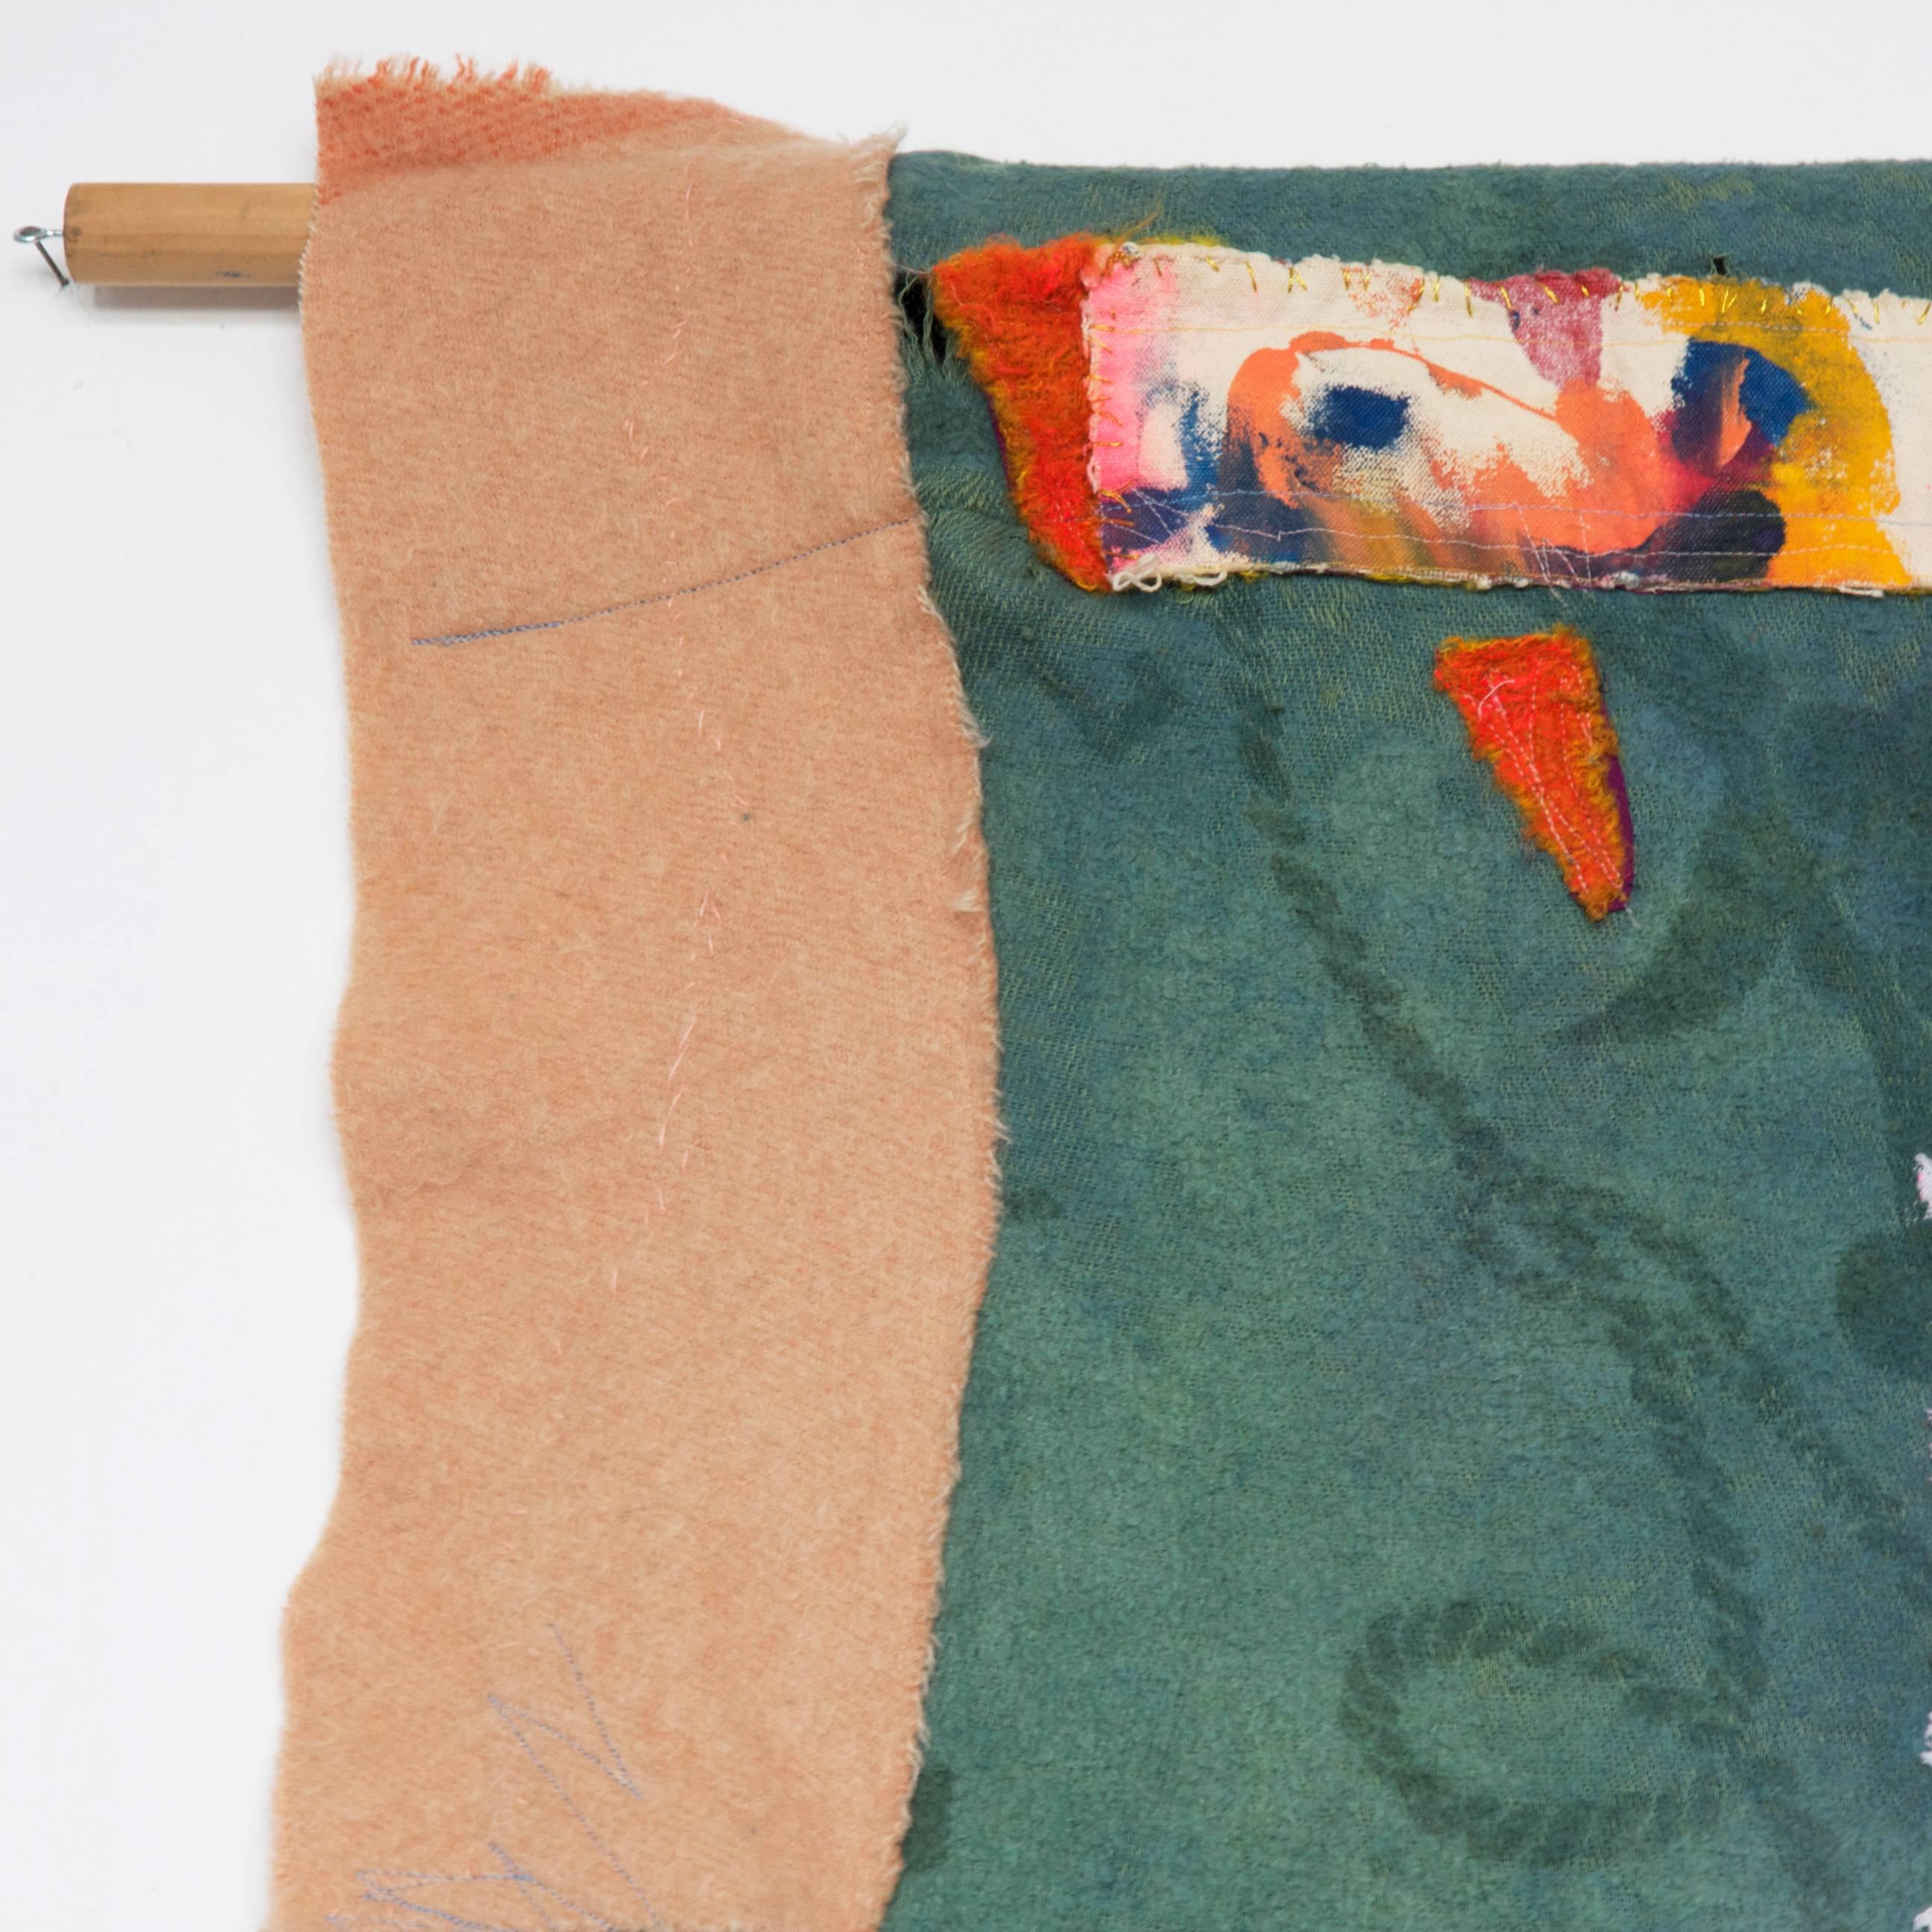 Made in 2013 by Naomi Clark

Cotton blanket with dye, paint and appliqué

Naomi Clark’s Quilt Paintings are made from vintage camp blankets culled from EBay, flea markets and garage sales. She refigures the old blankets to create abstract and